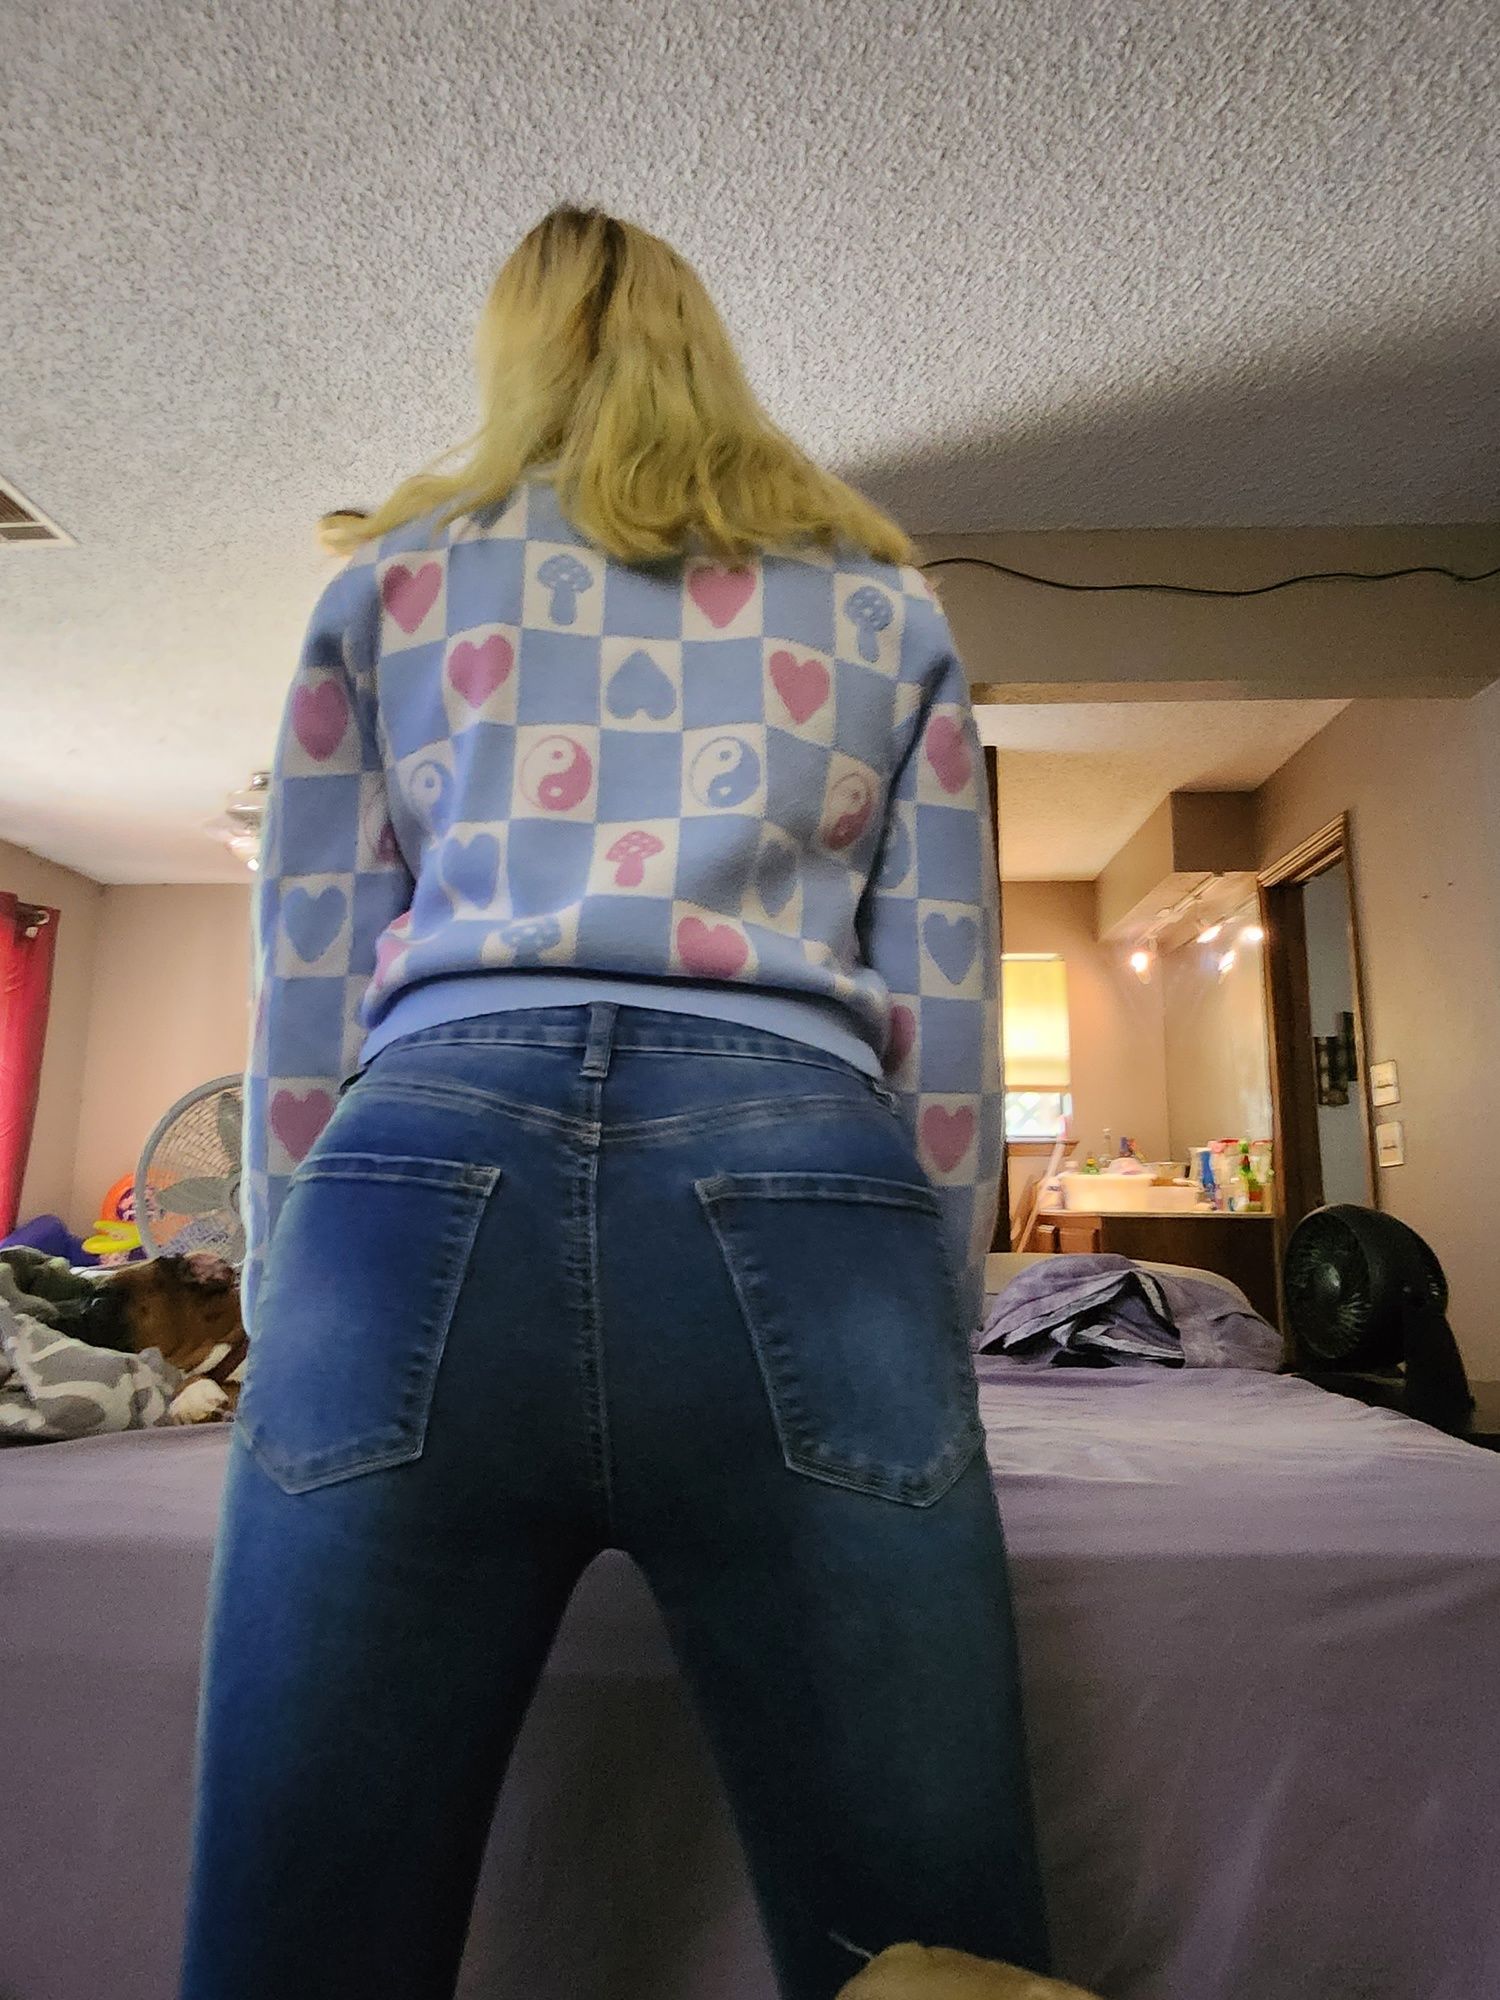 Bodysuits and Jeans - Mama_Foxx94 #14